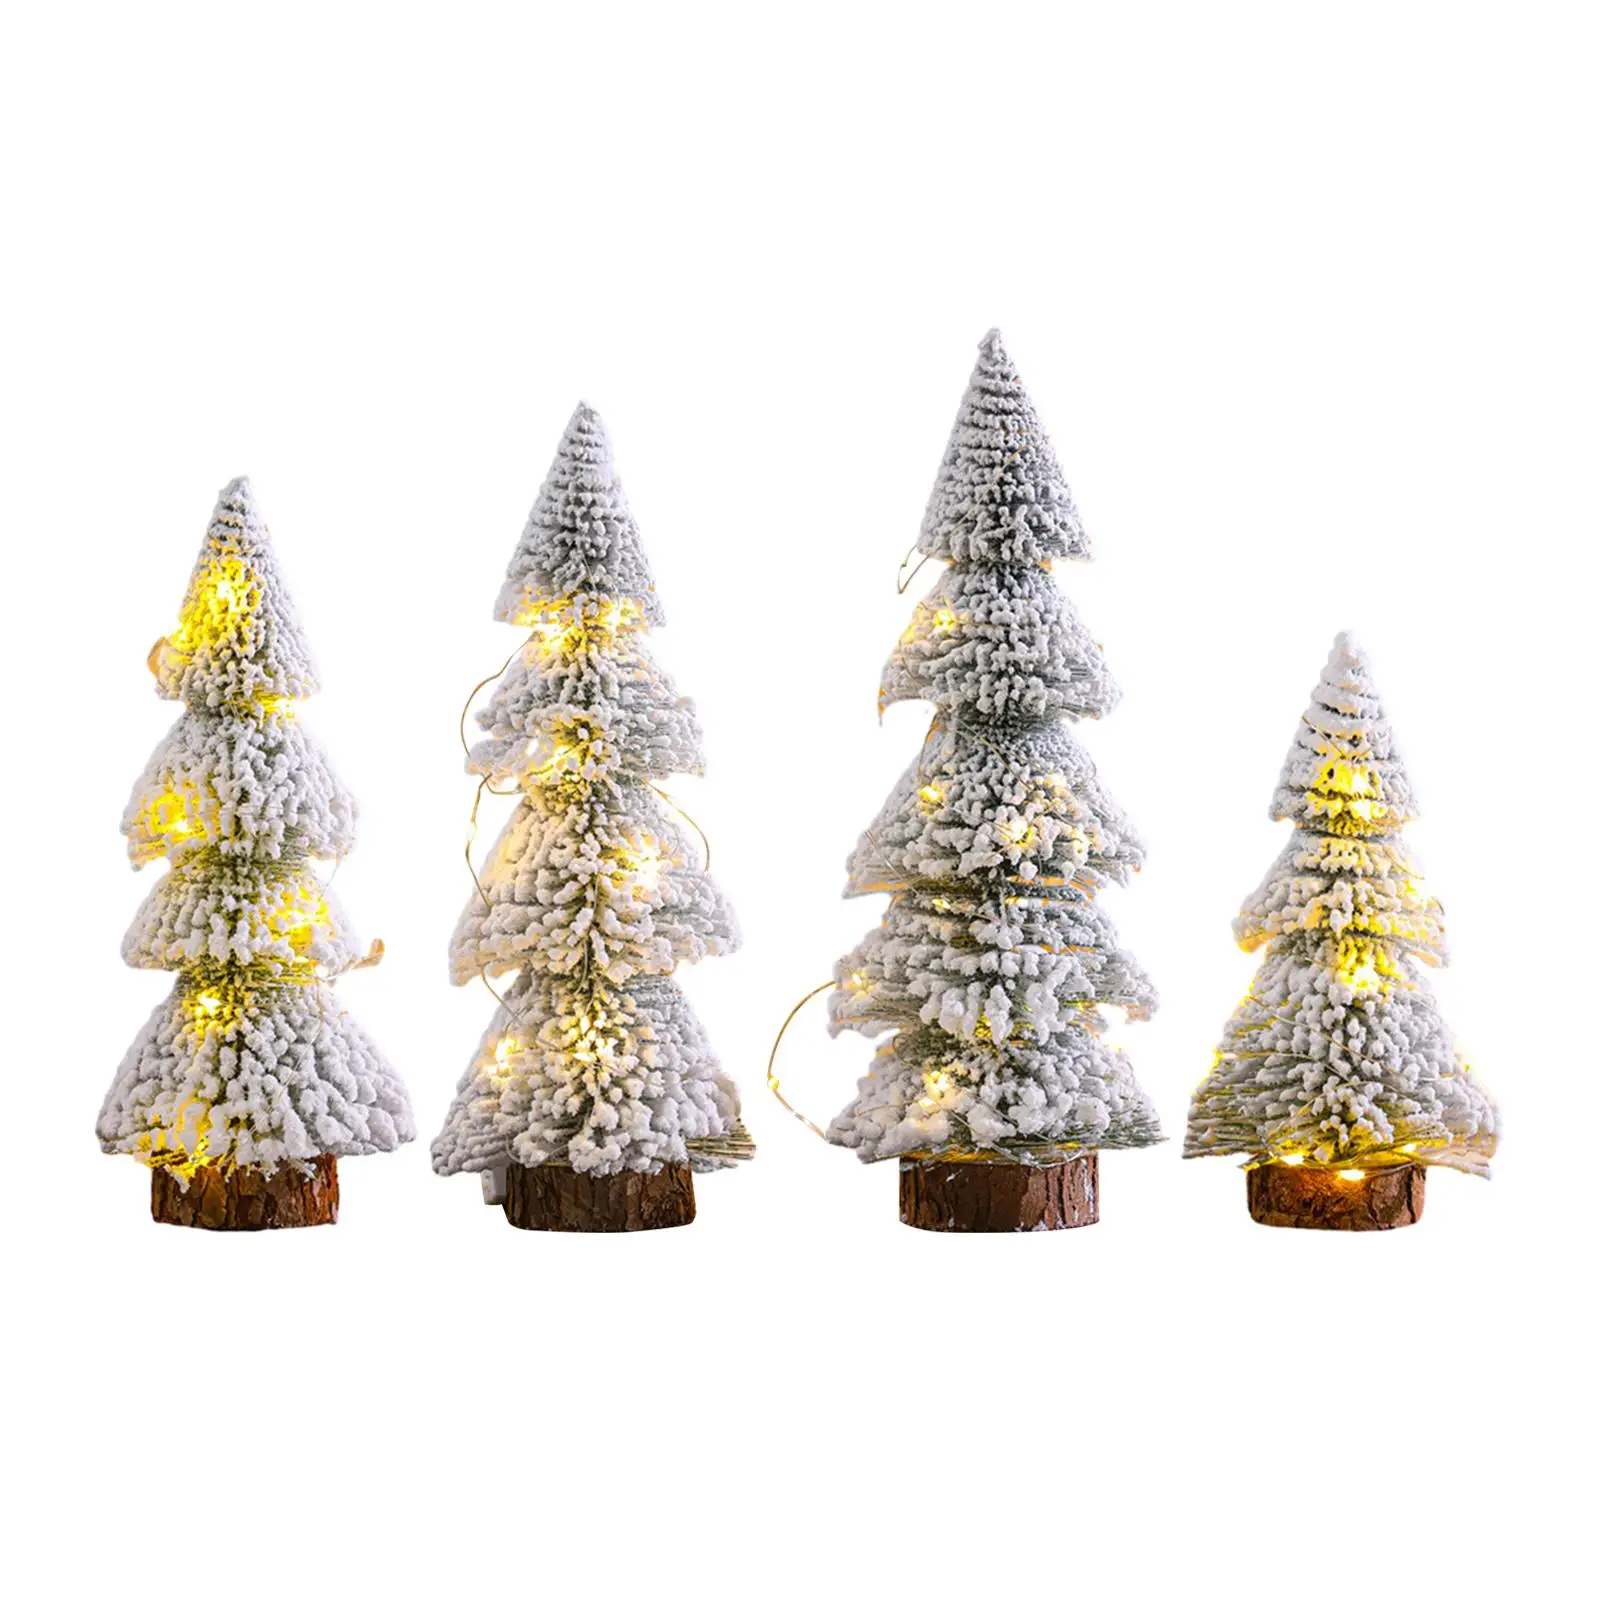 Tabletop Christmas Tree Centerpiece Ornament Party Supplies Mini Xmas Tree for Table Holiday Fireplace Home Decorations